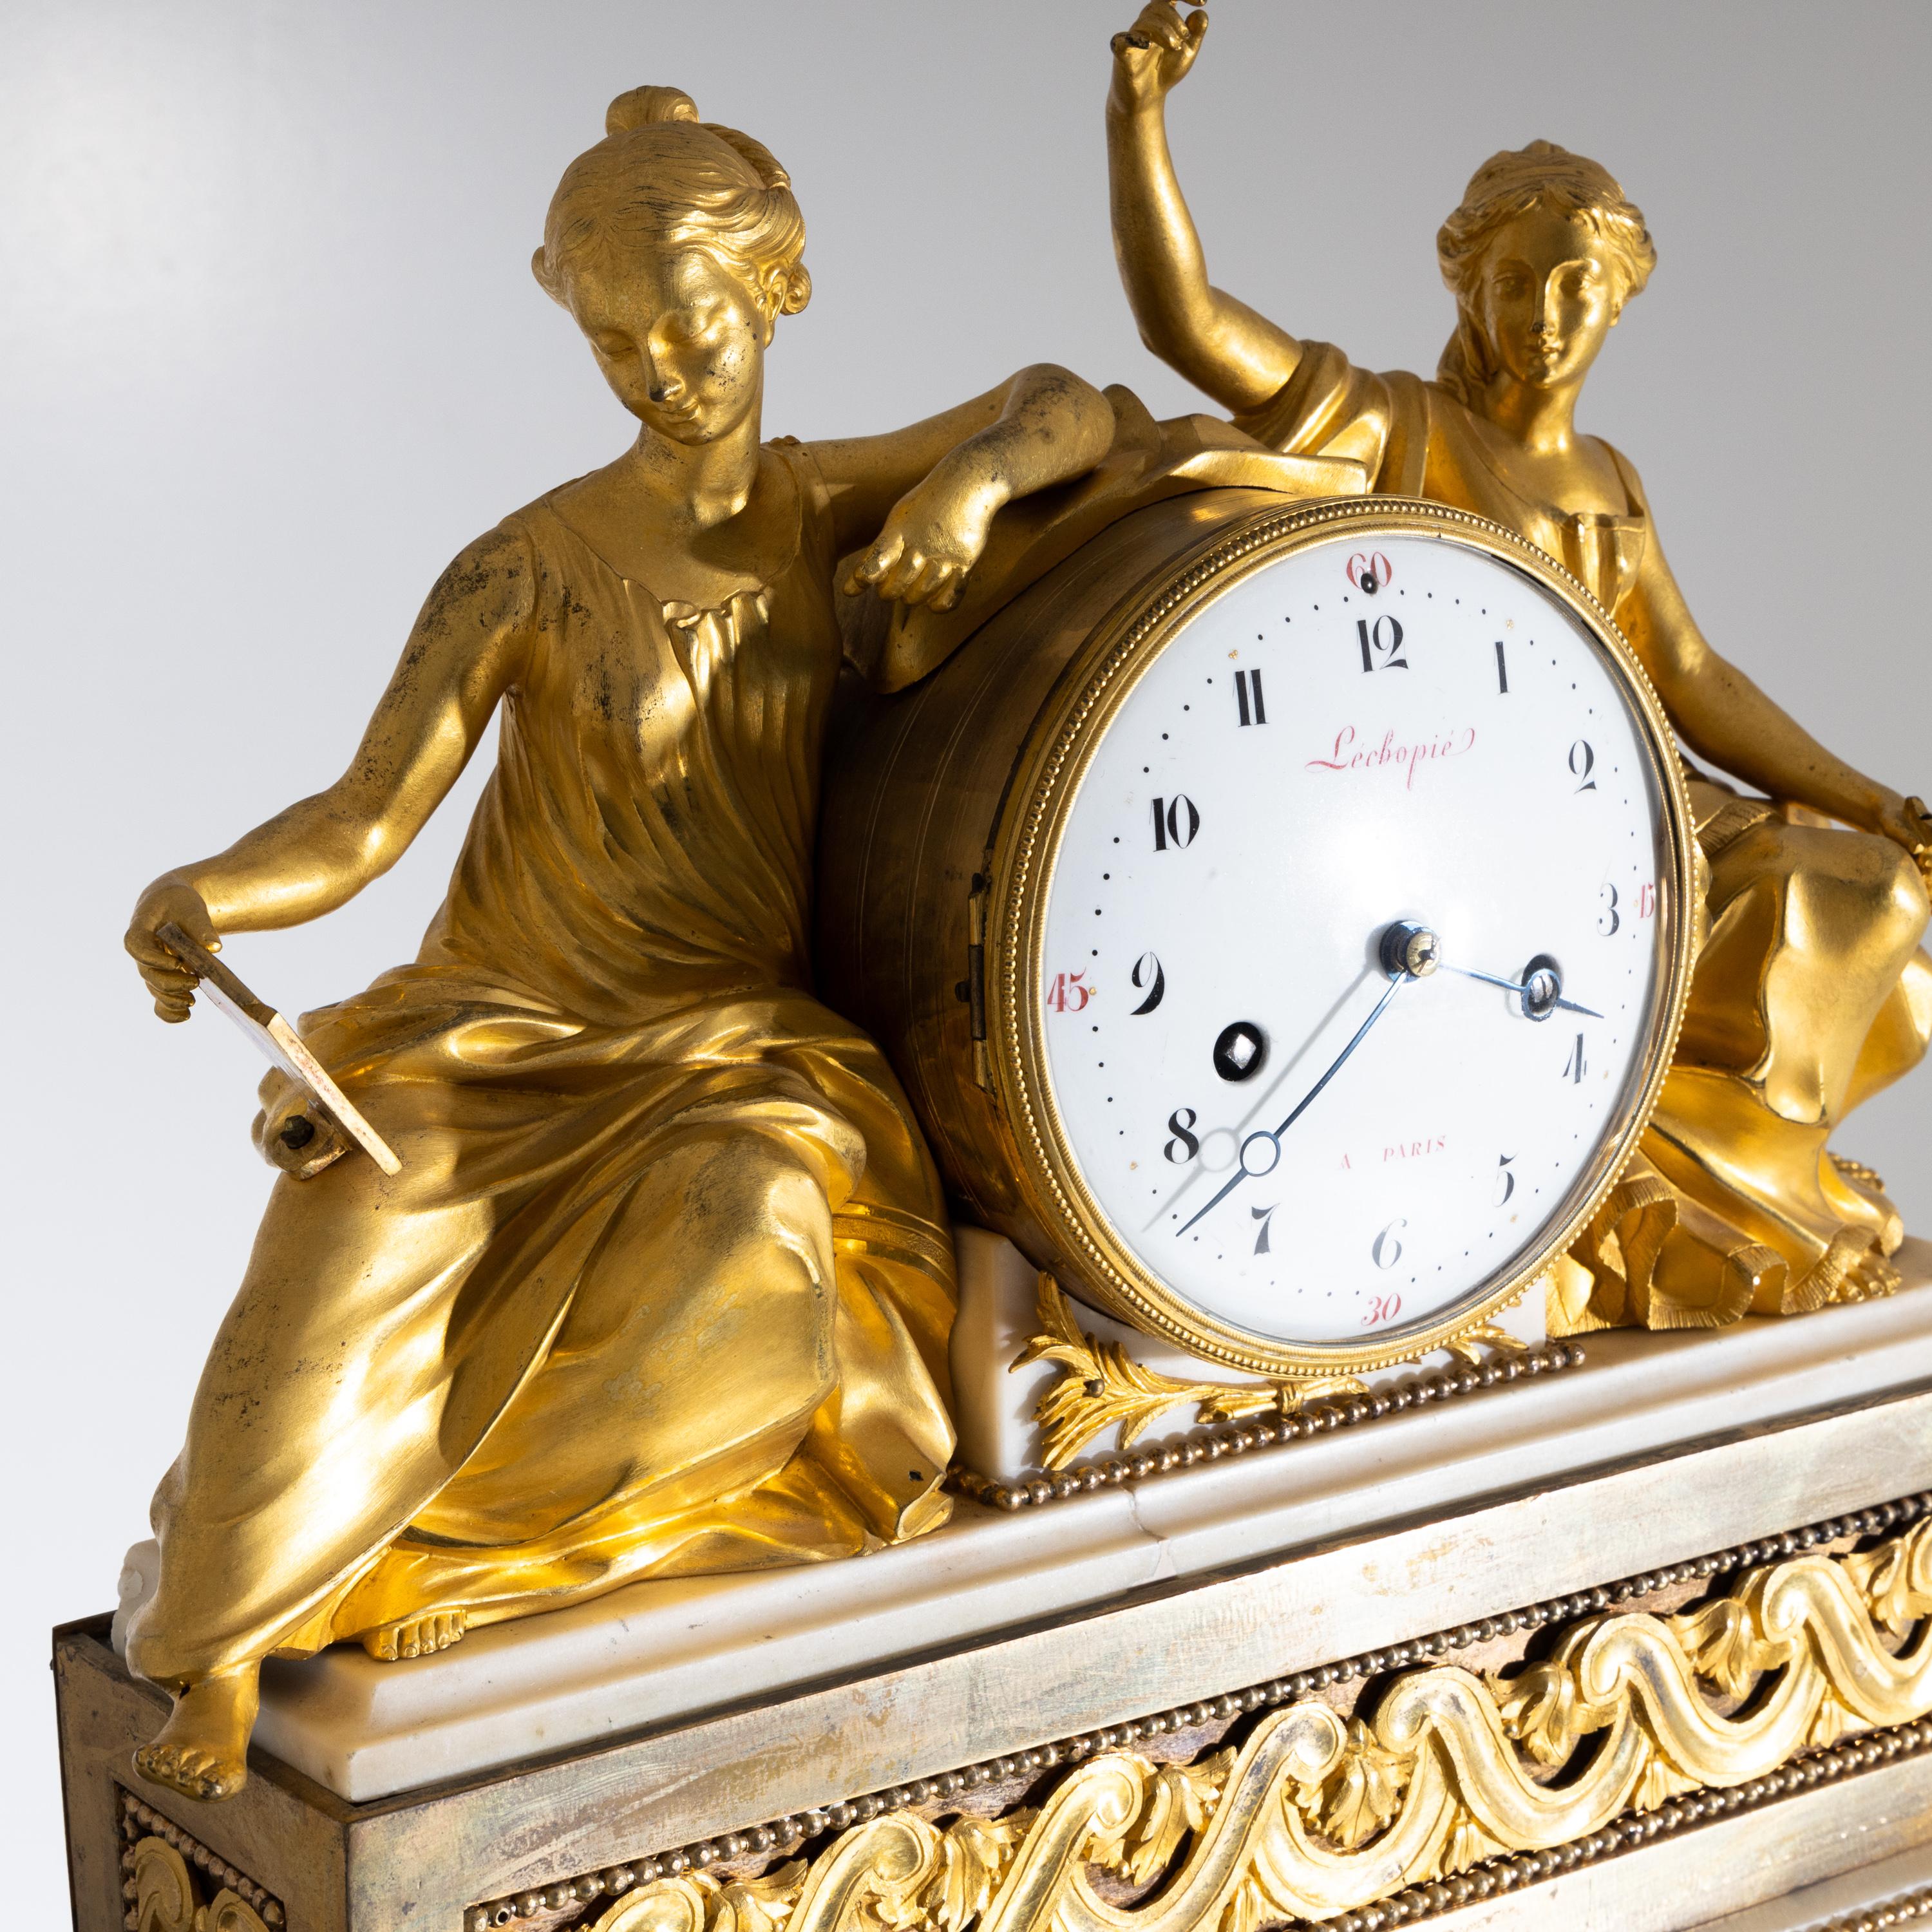 Late 18th Century Pendule Clock “Studying the Tablets of the Law”, France, Paris, circa 1770-1780